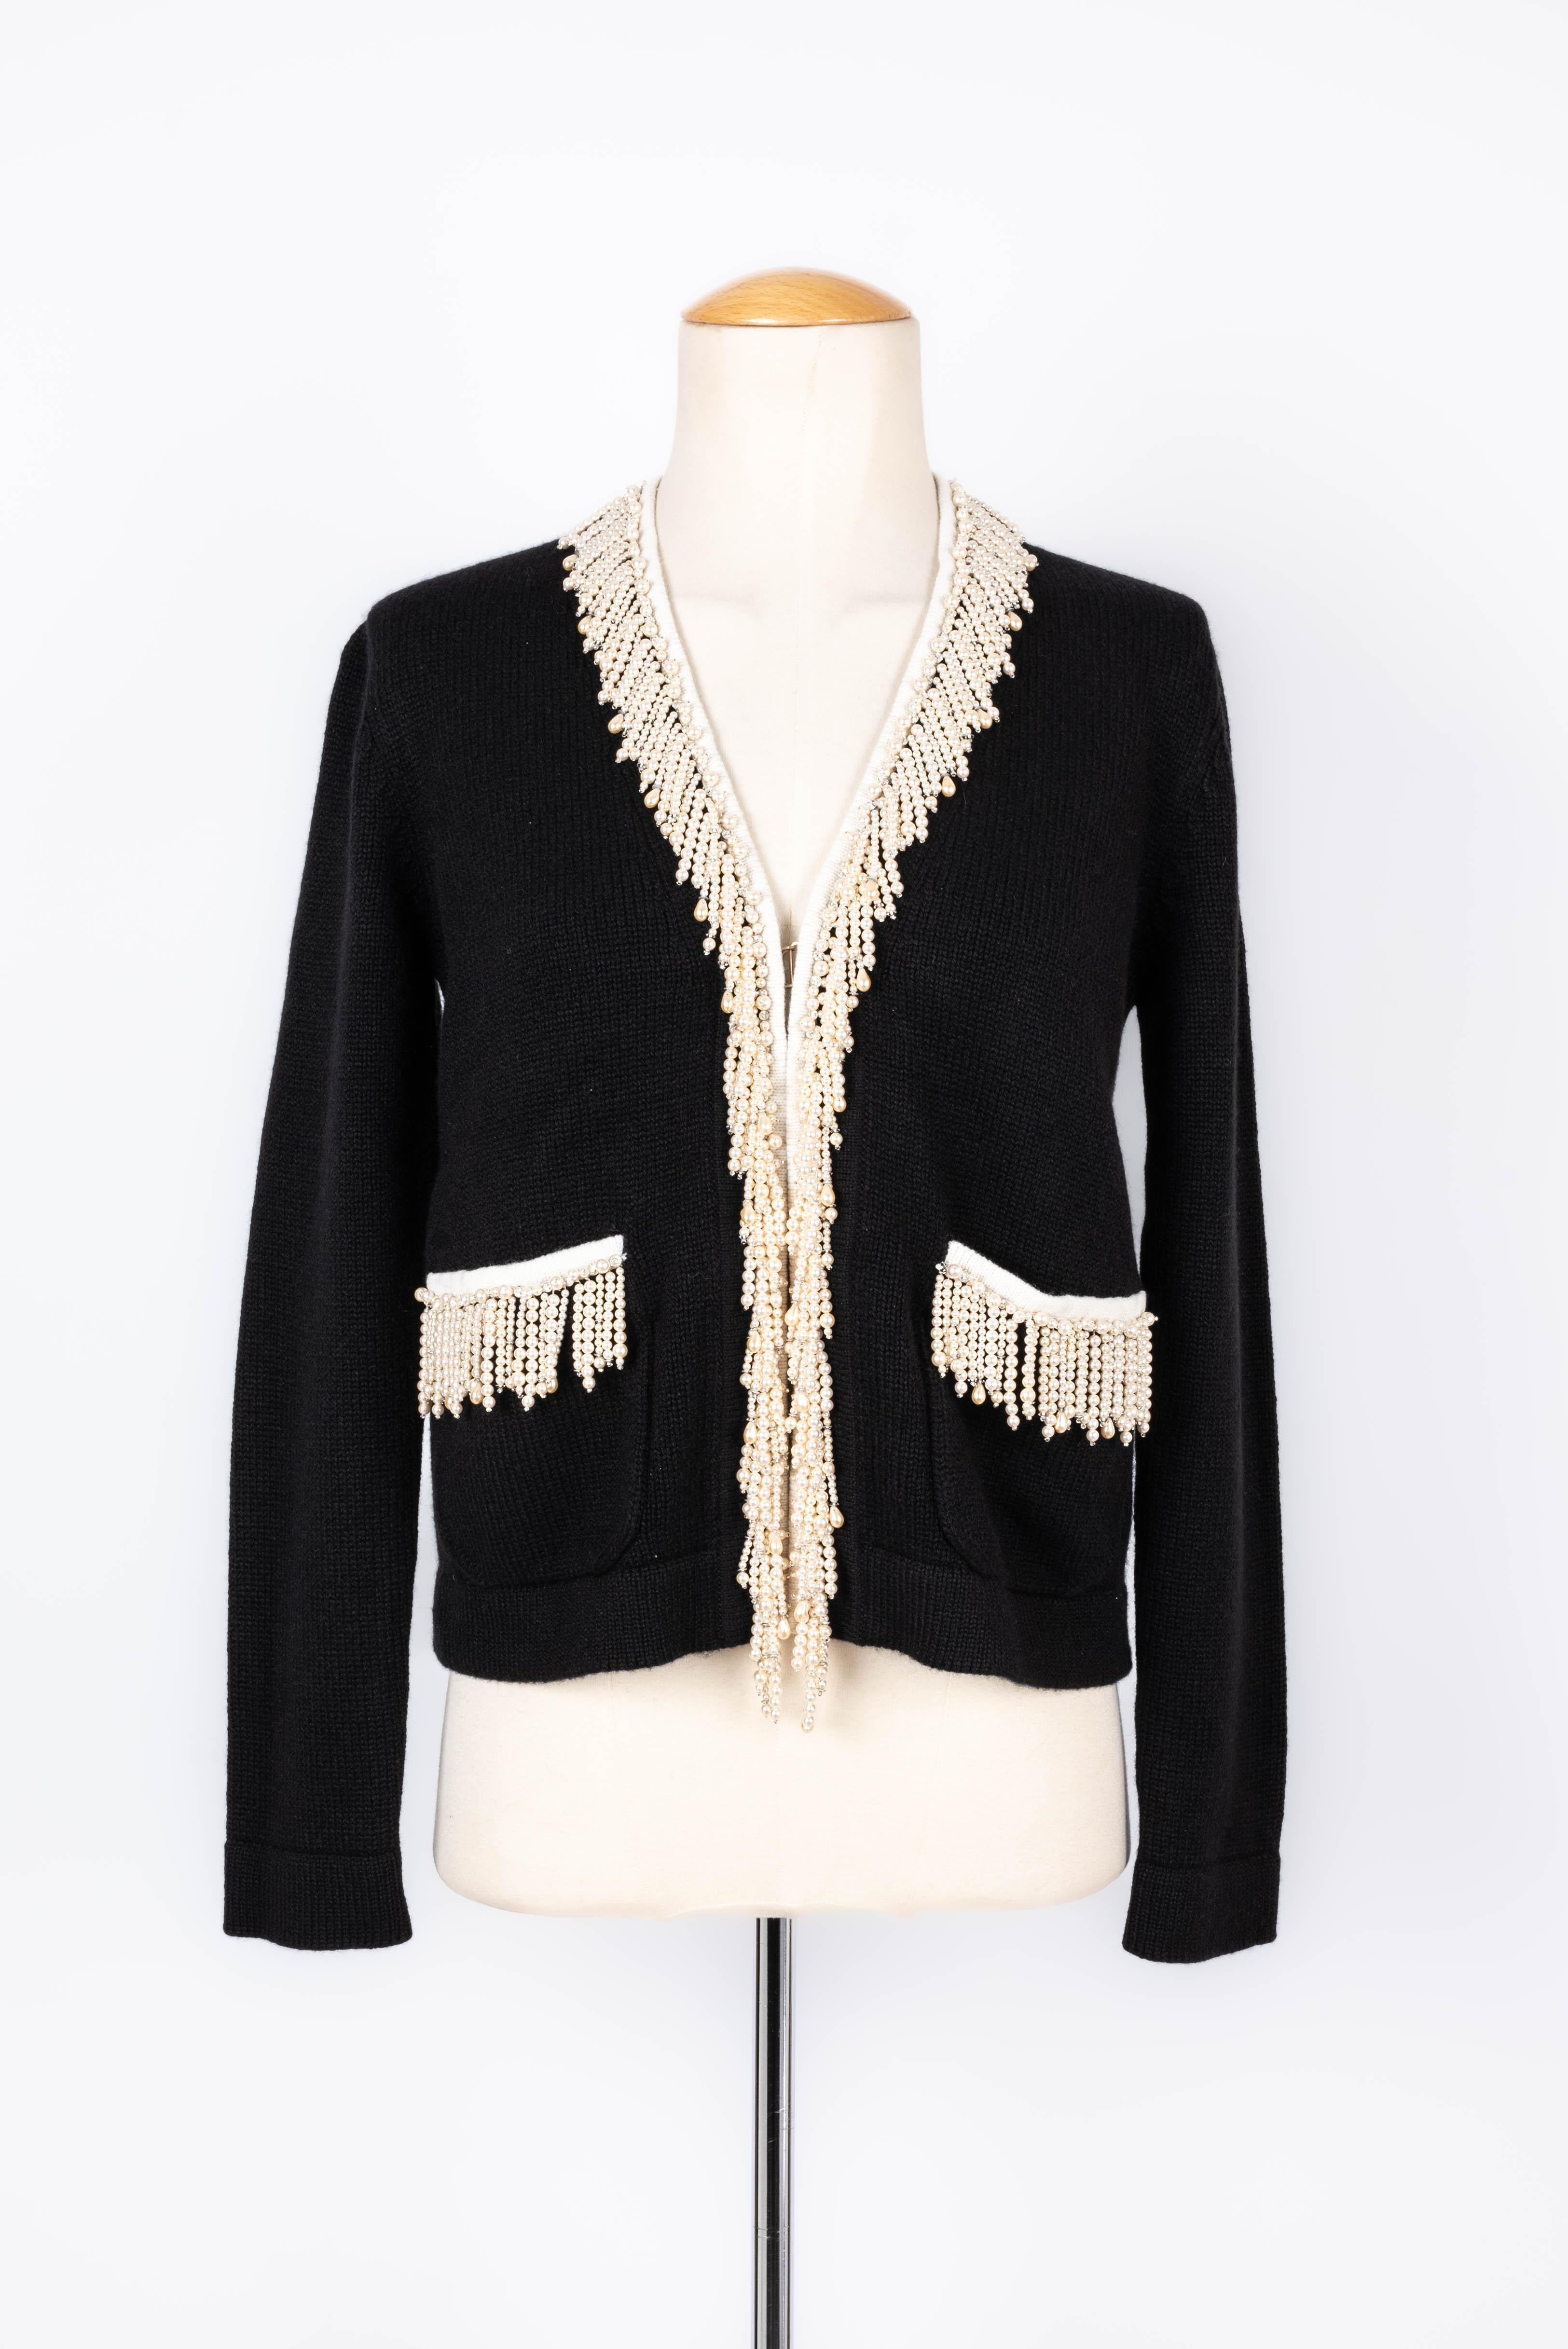 CHANEL - (Made in Italy) Cardigan in cashmere edged with costume pearls and rhinestones. Fall-Winter 2021 Ready-to-wear Collection. Size 34FR.

Condition:
Never worn, with label

Dimensions:
Shoulder width: 40 cm - Sleeve length: 59 cm - Length: 55